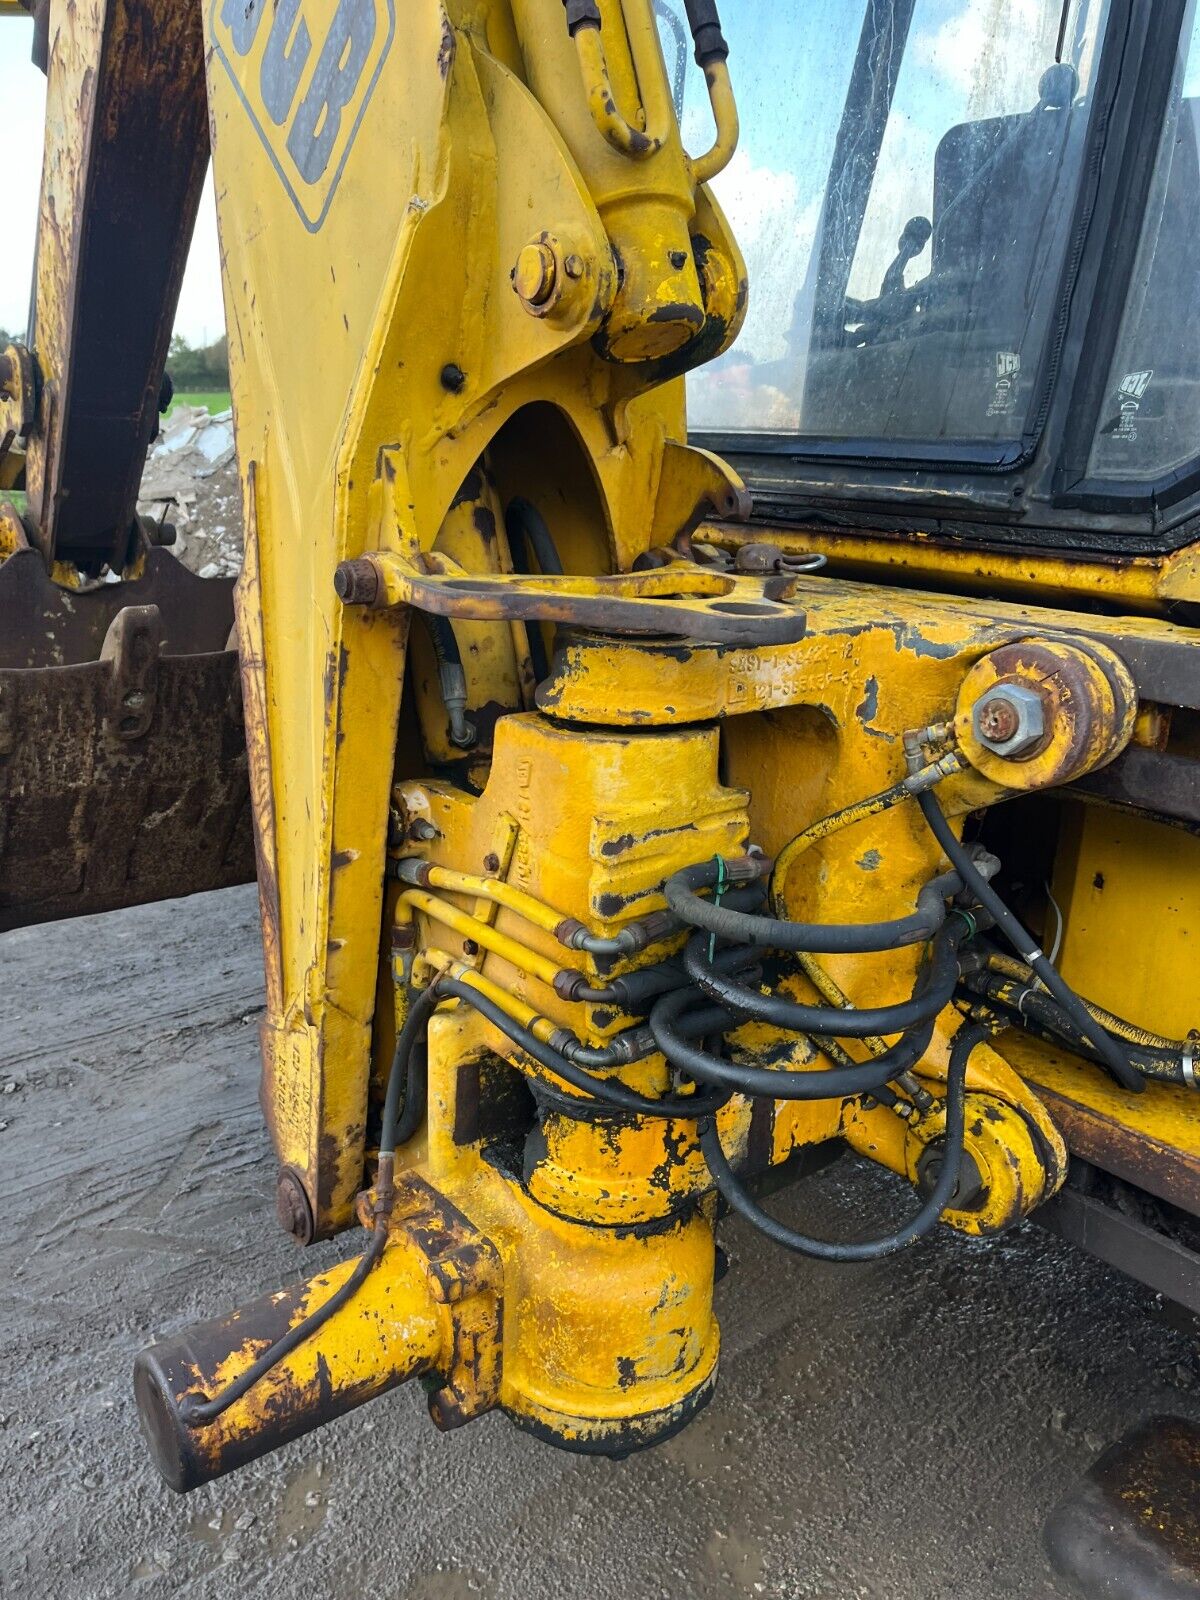 Bid on 1984 JCB 3CX 2 WHEEL DRIVE BACKHOE LOADER- Buy &amp; Sell on Auction with EAMA Group